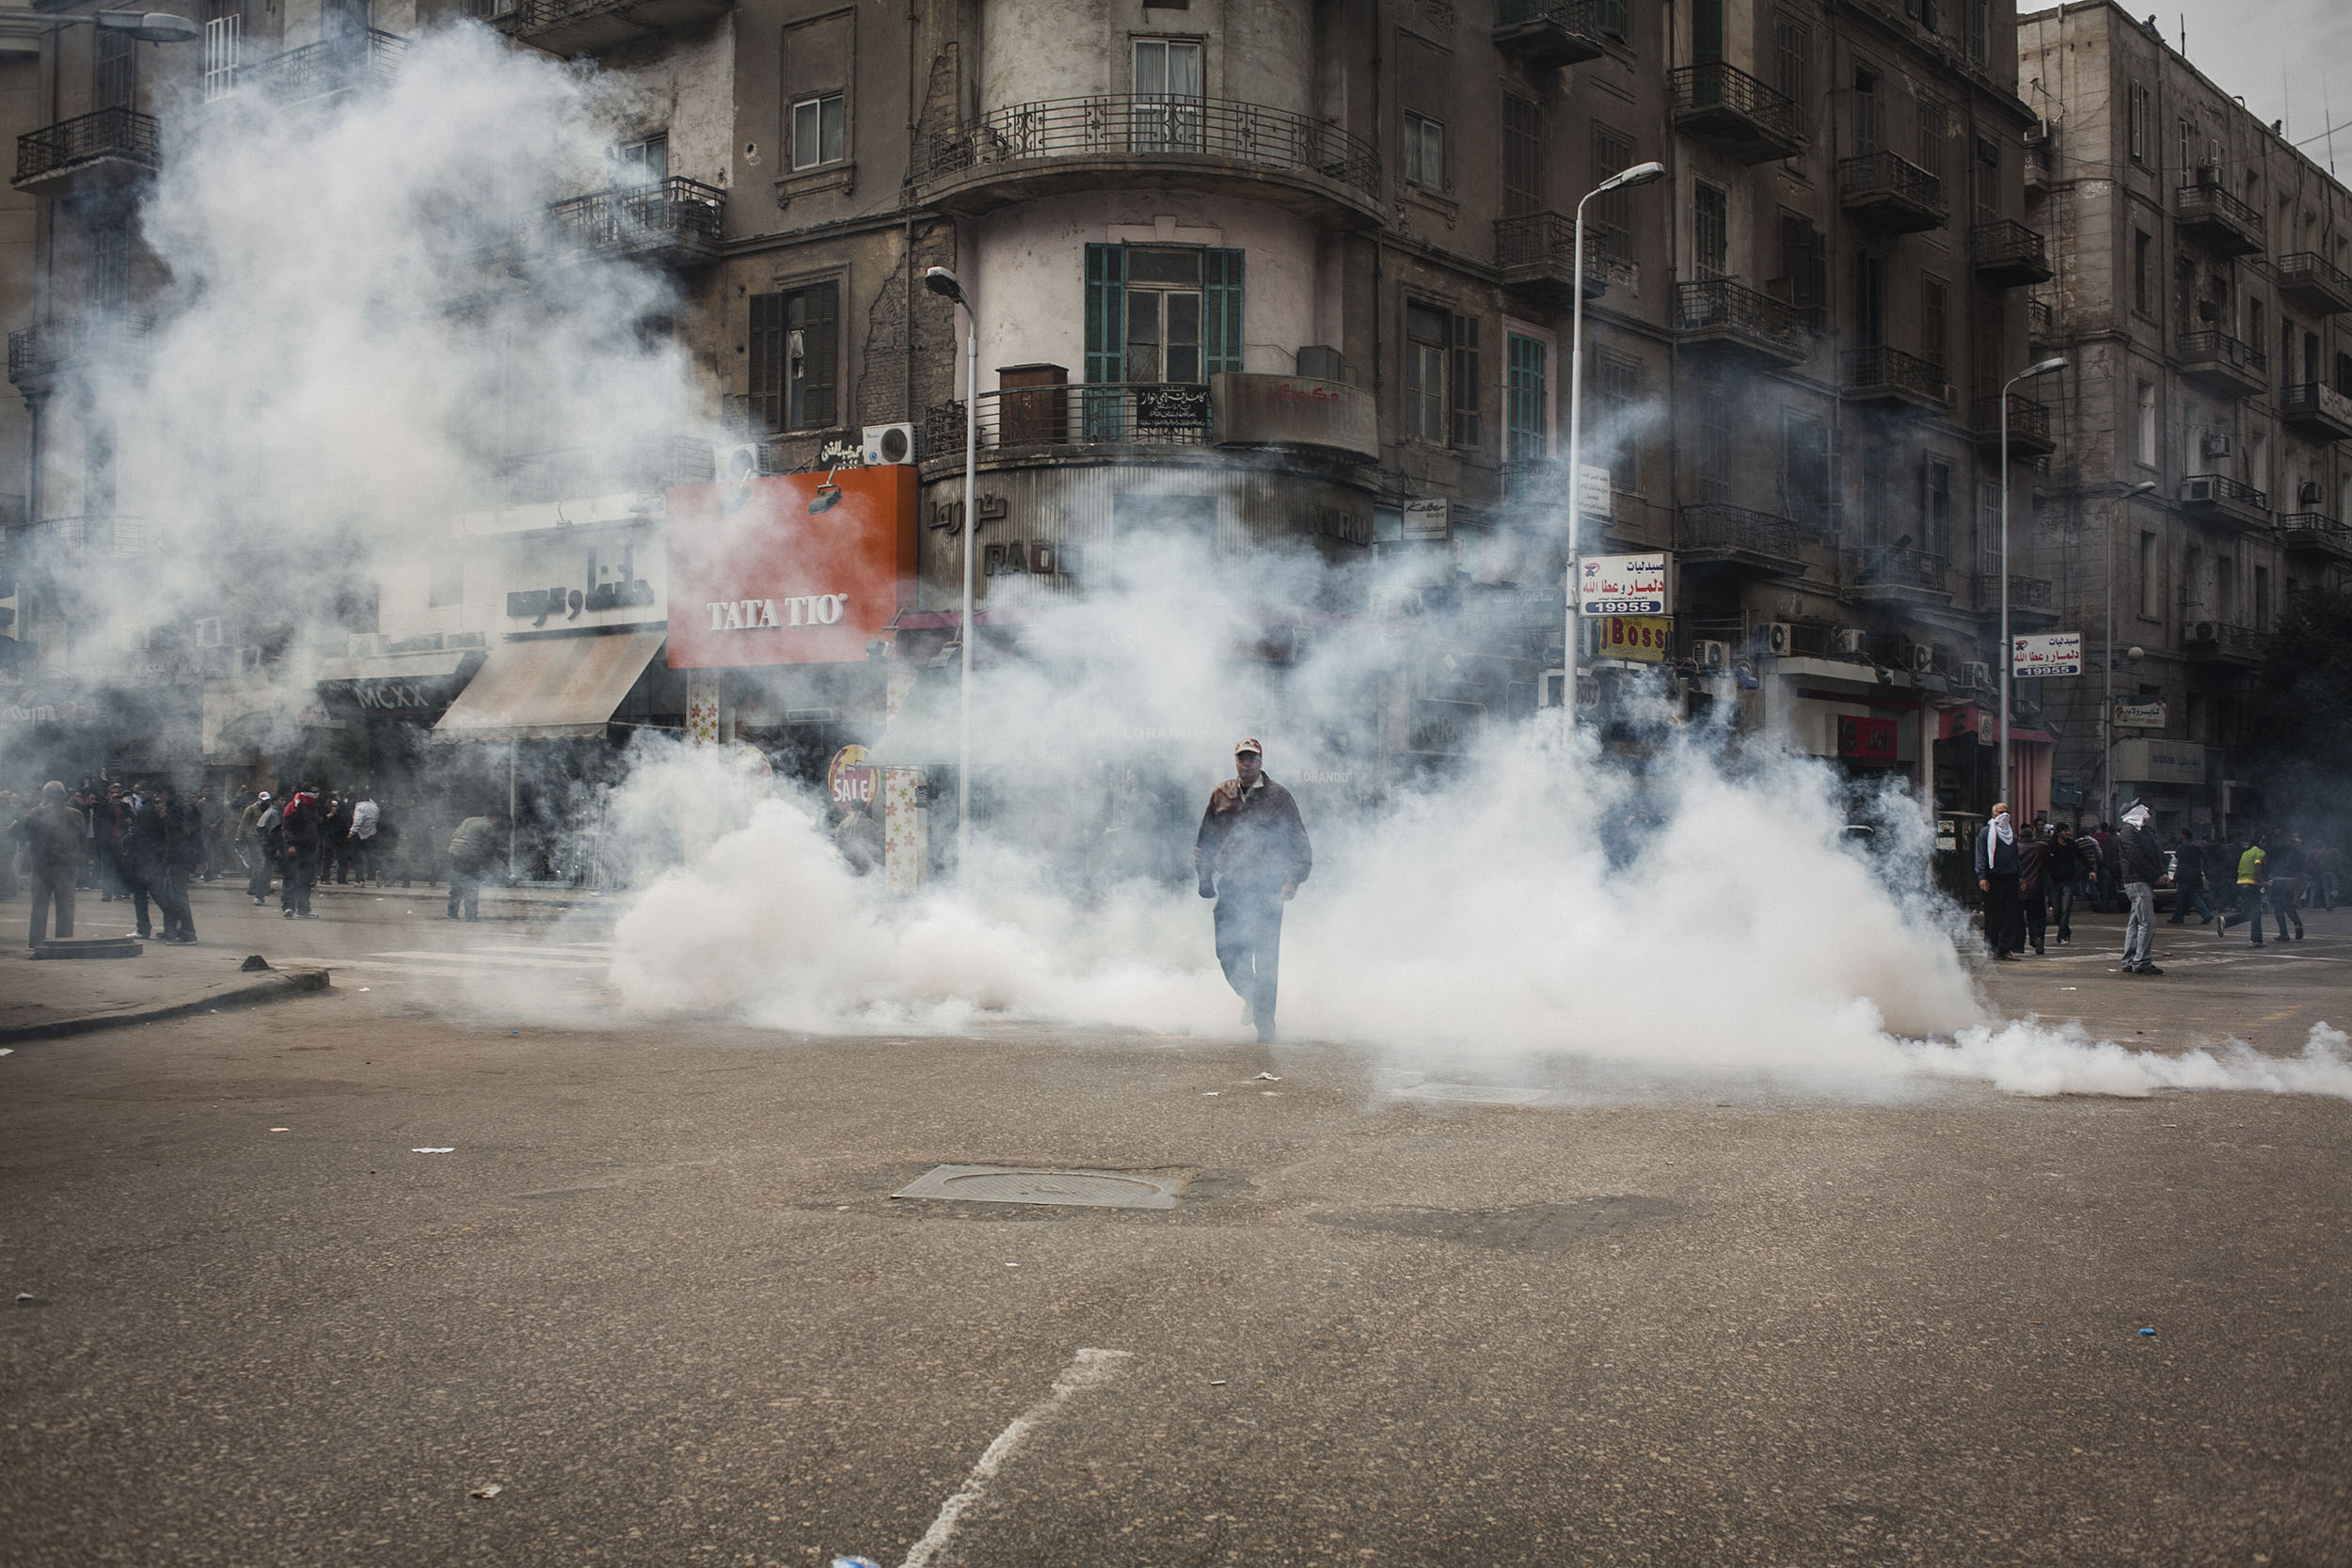  Protesters march through the streets of central Cairo amidst tear gas fired by the police. 25 January 2011 saw the beginning of a non-violent 18 day protest movement that eventually ended the 30-year rule of Hosni Mubarak and his National Democratic